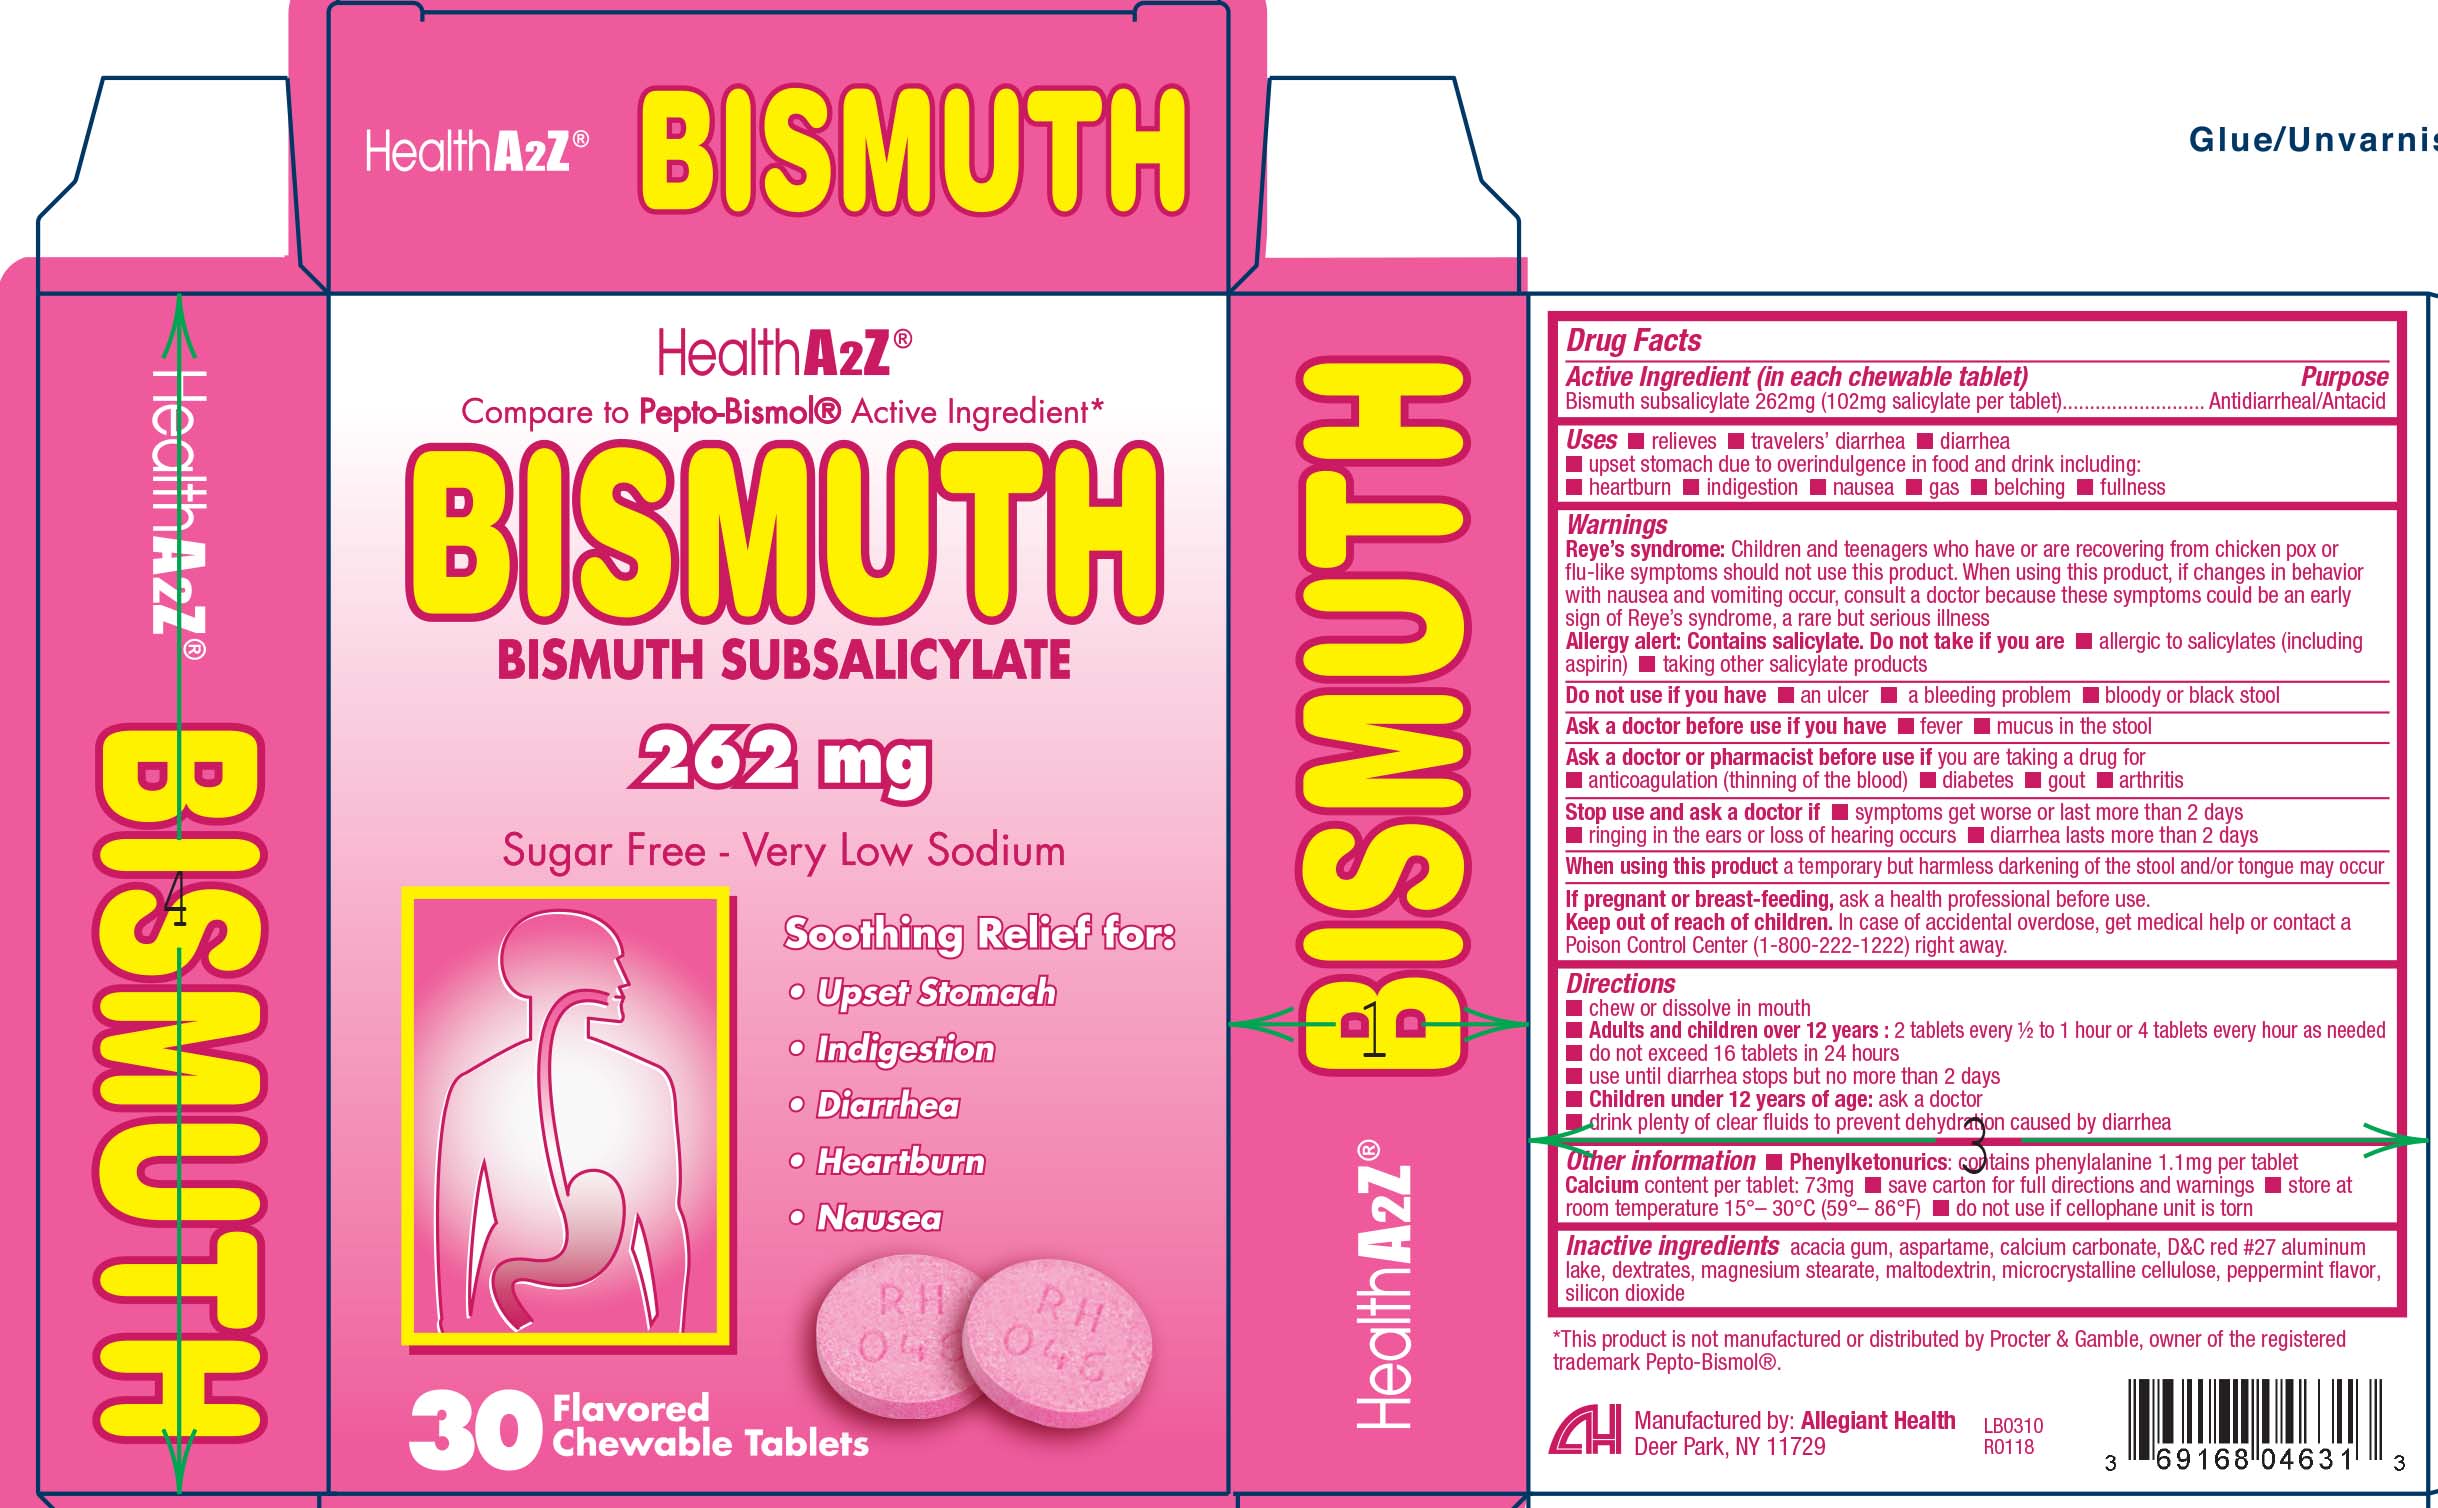 Bismuth subsalicylate 262mg